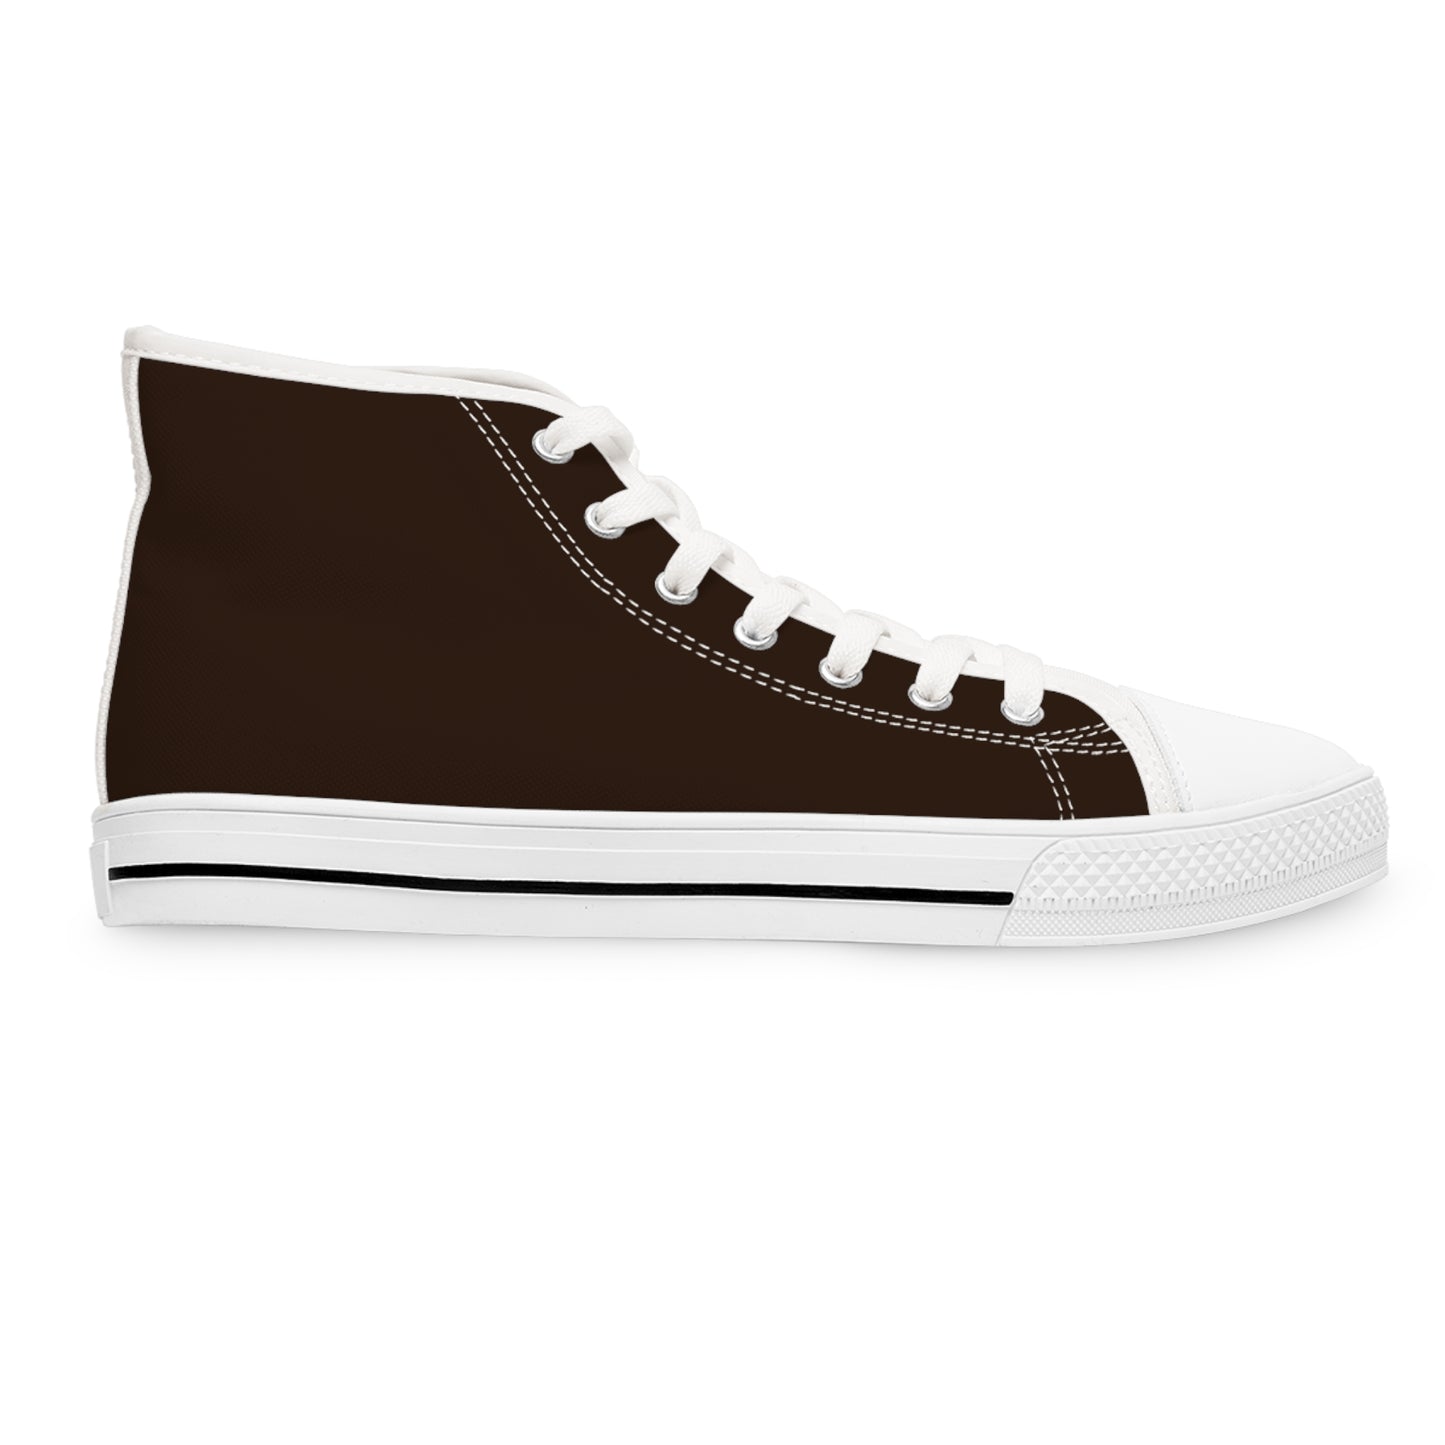 Women's Canvas High Top Solid Color Sneakers - Chocolate Cherry US 12 White sole